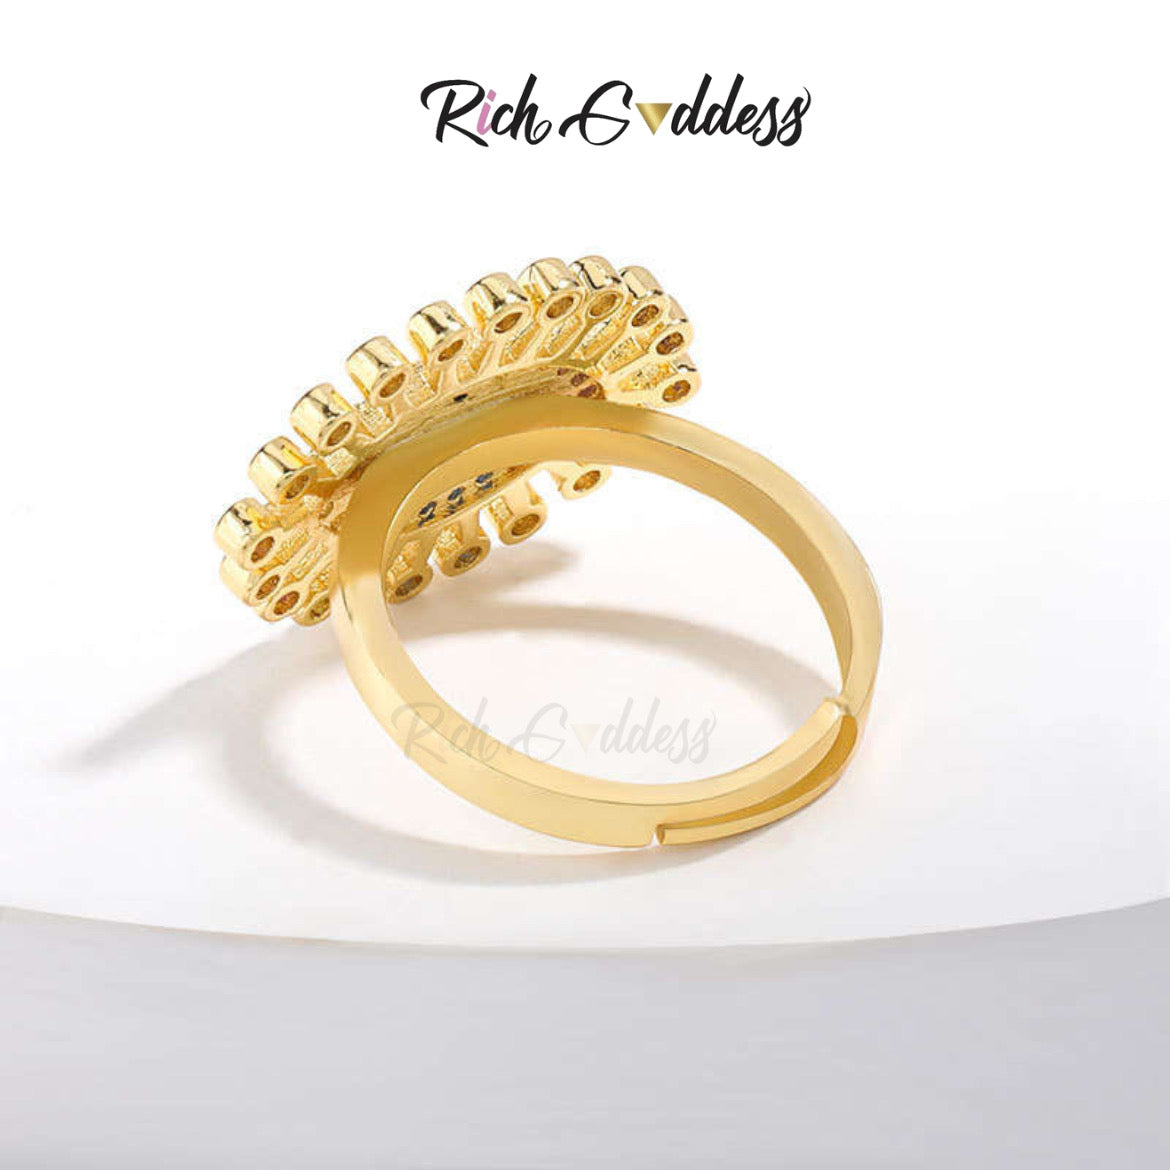 Rich Goddess- Colors of the Eye Adjustable Ring